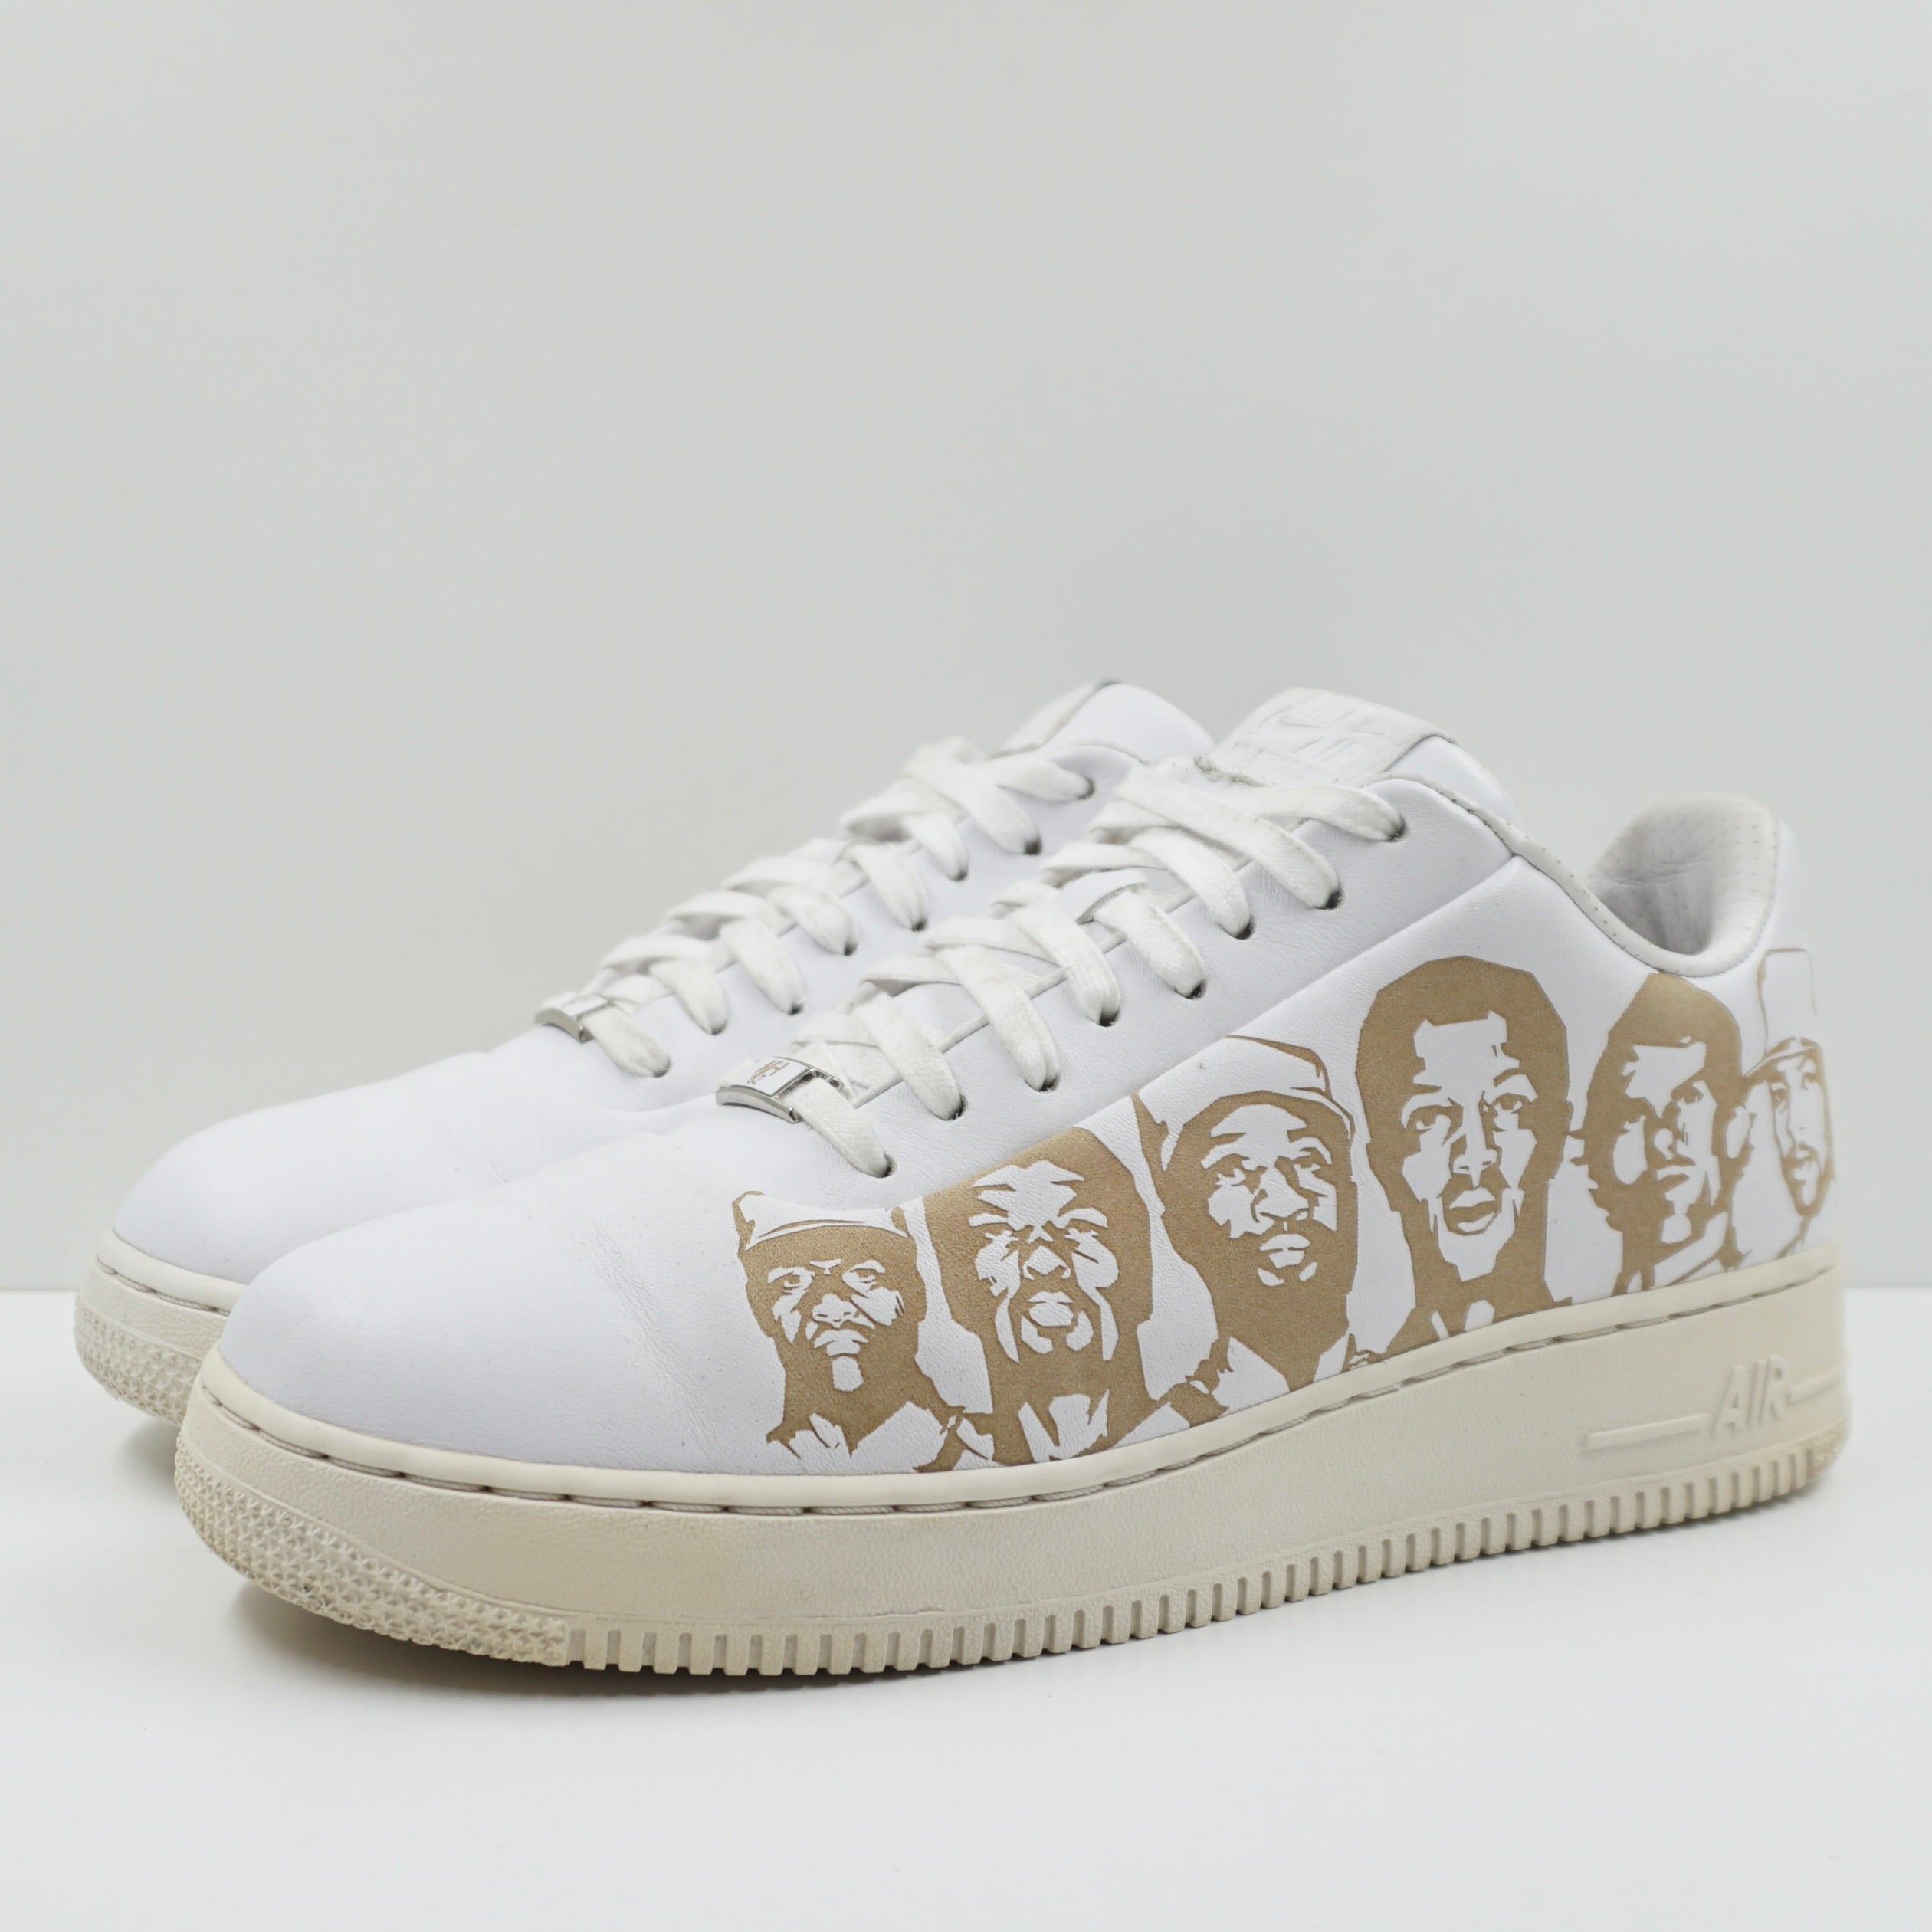 Nike Air Force 1 Low '07 PRM Players